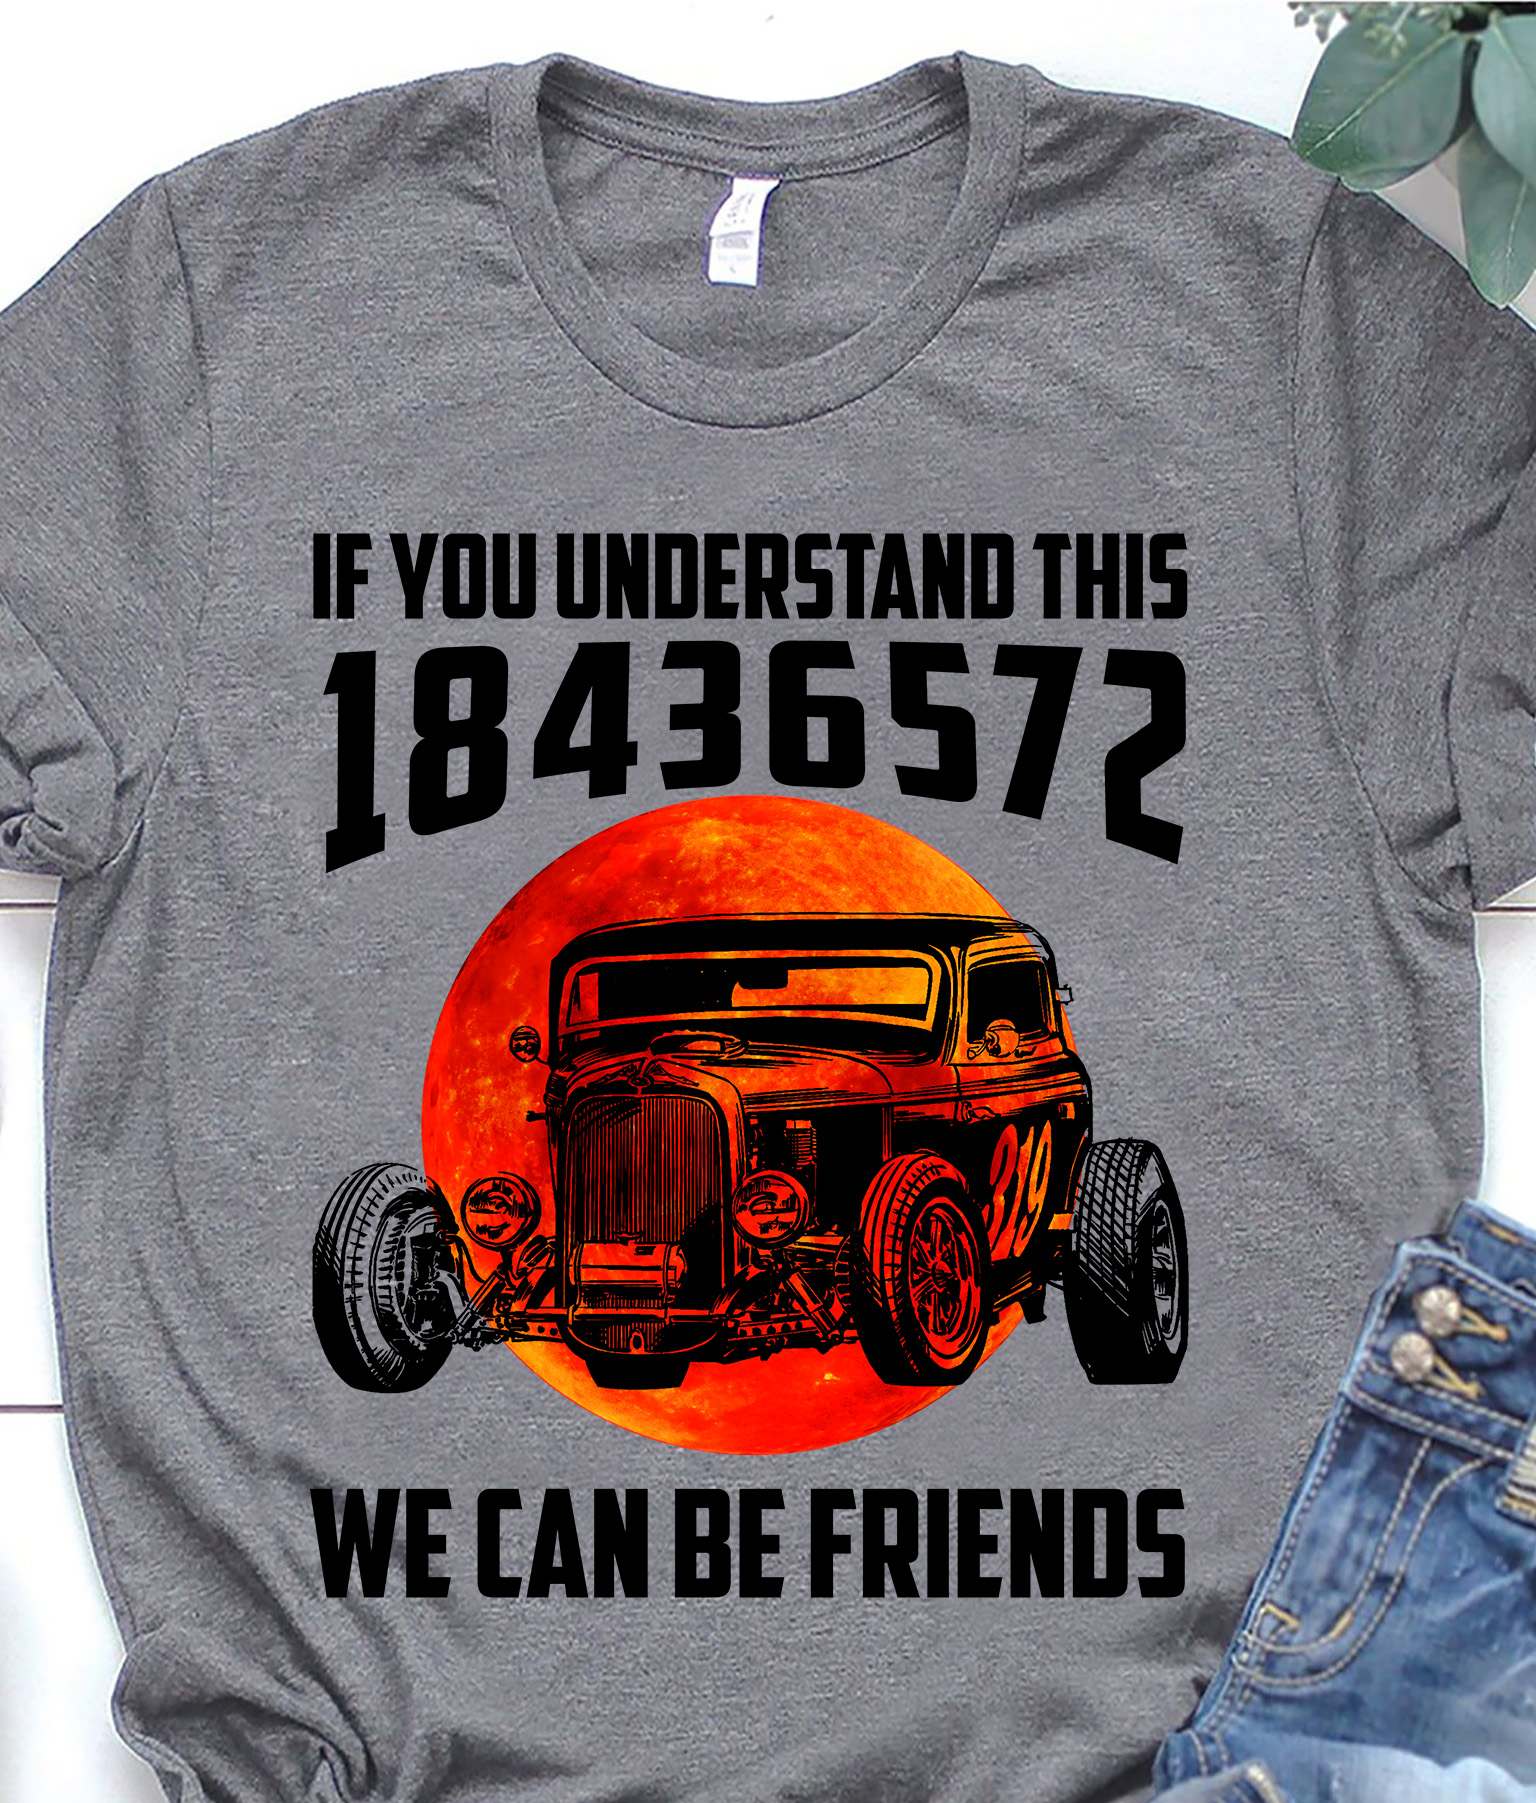 If you understand this 18436572 We can be friends - Hot rod, love driving hot rod